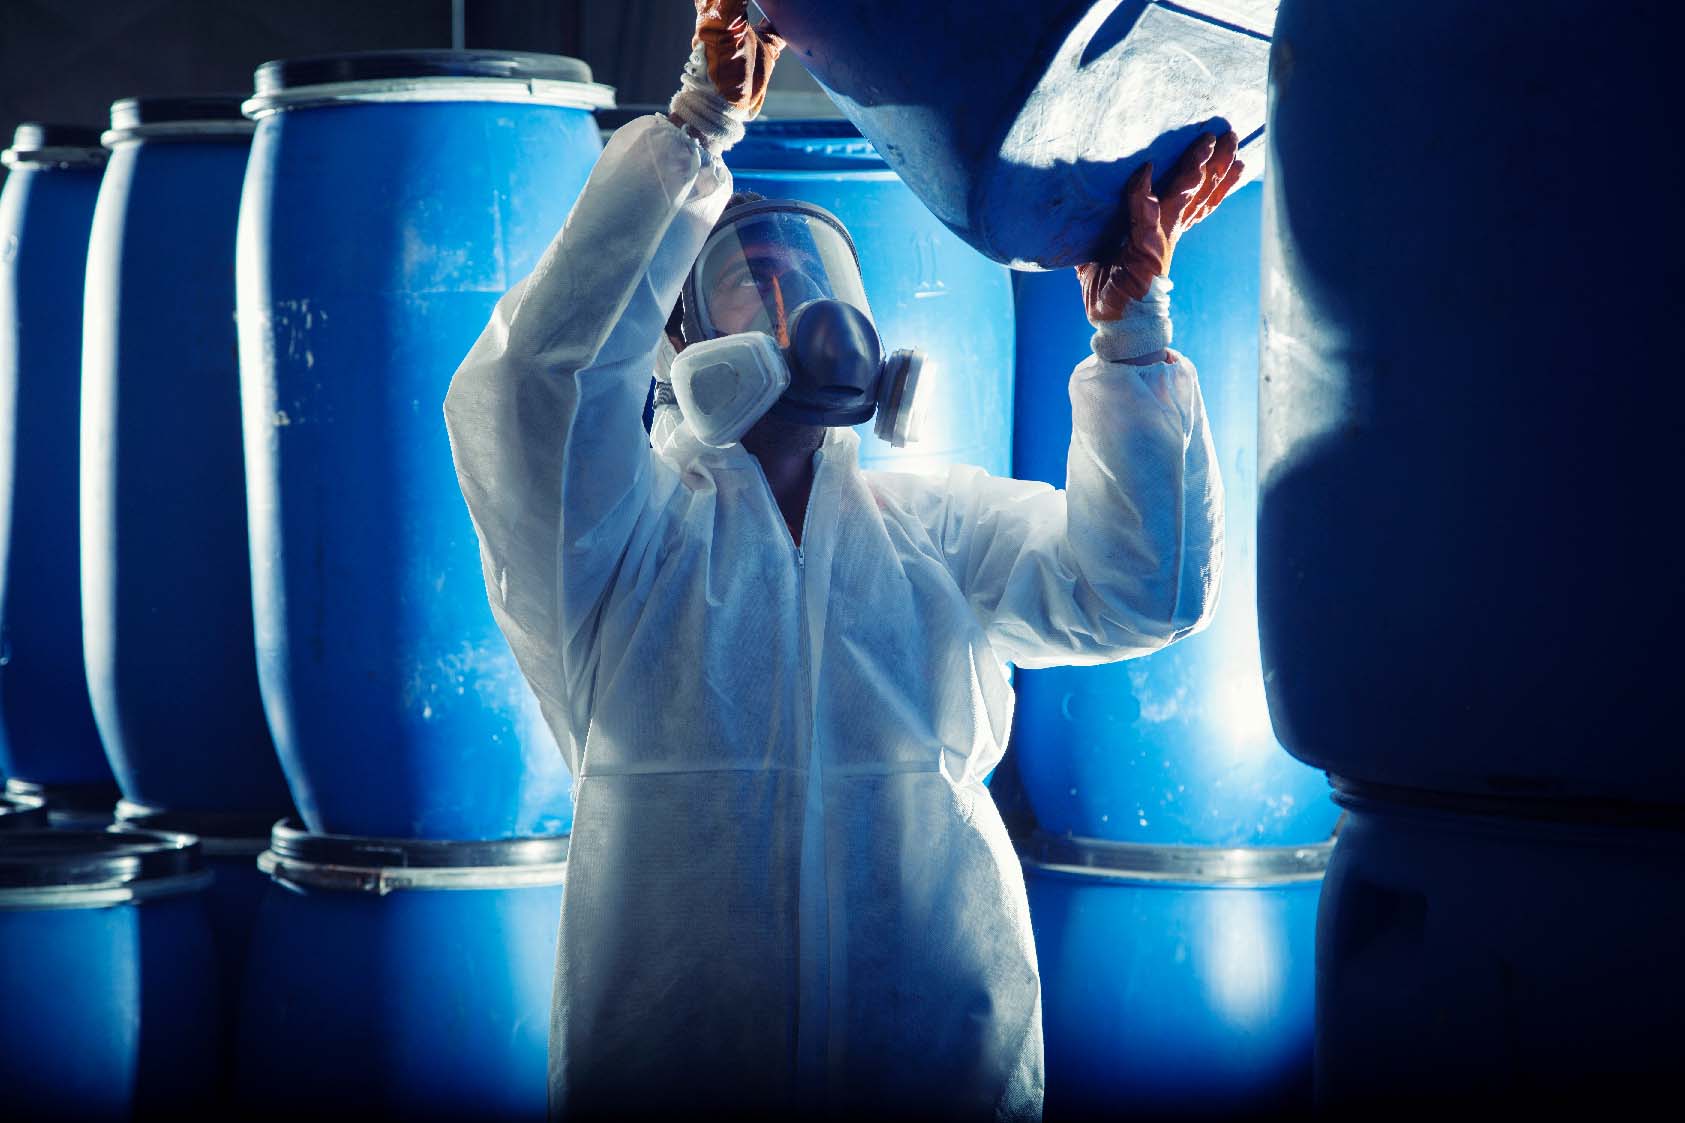 Completing Your Mission with Comprehensive Hazardous Material Management